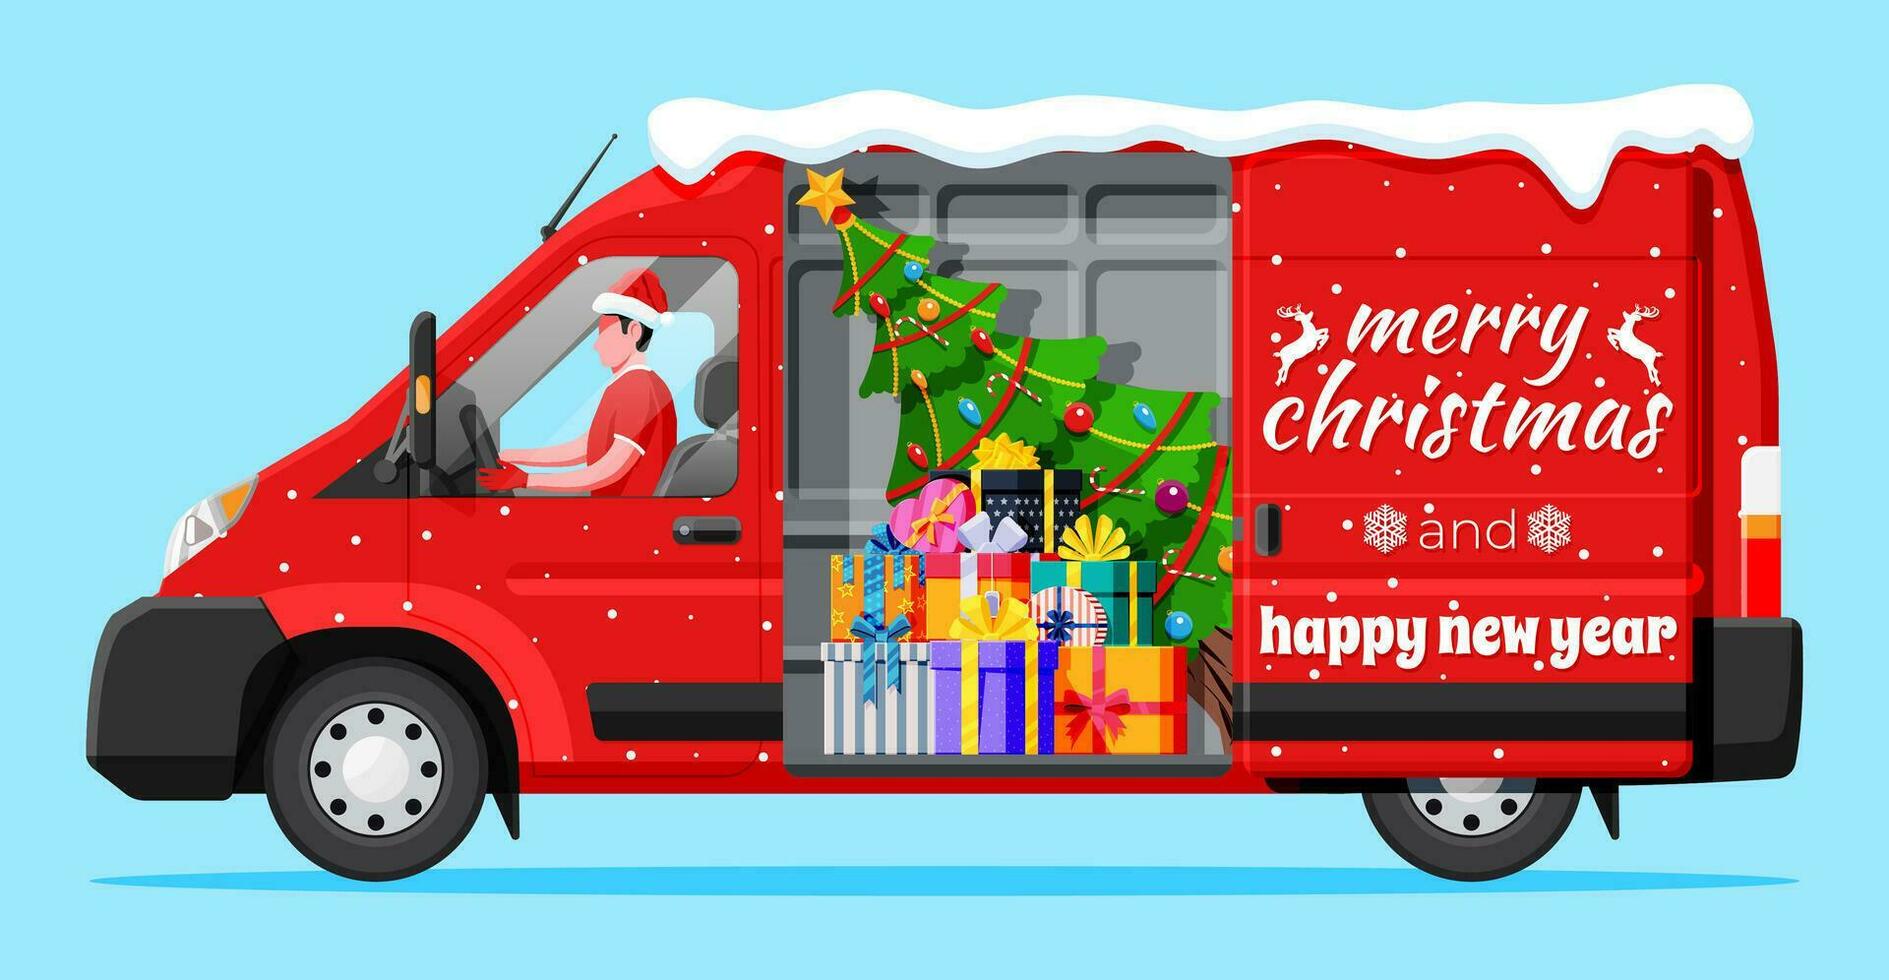 Christmas Delivery Van Isolated. Gift Box and Tree Inside. Delivery Man in Santa Claus Hat. Happy New Year Decoration. Merry Christmas Holiday. New Year and Xmas Celebration. Flat Vector Illustration